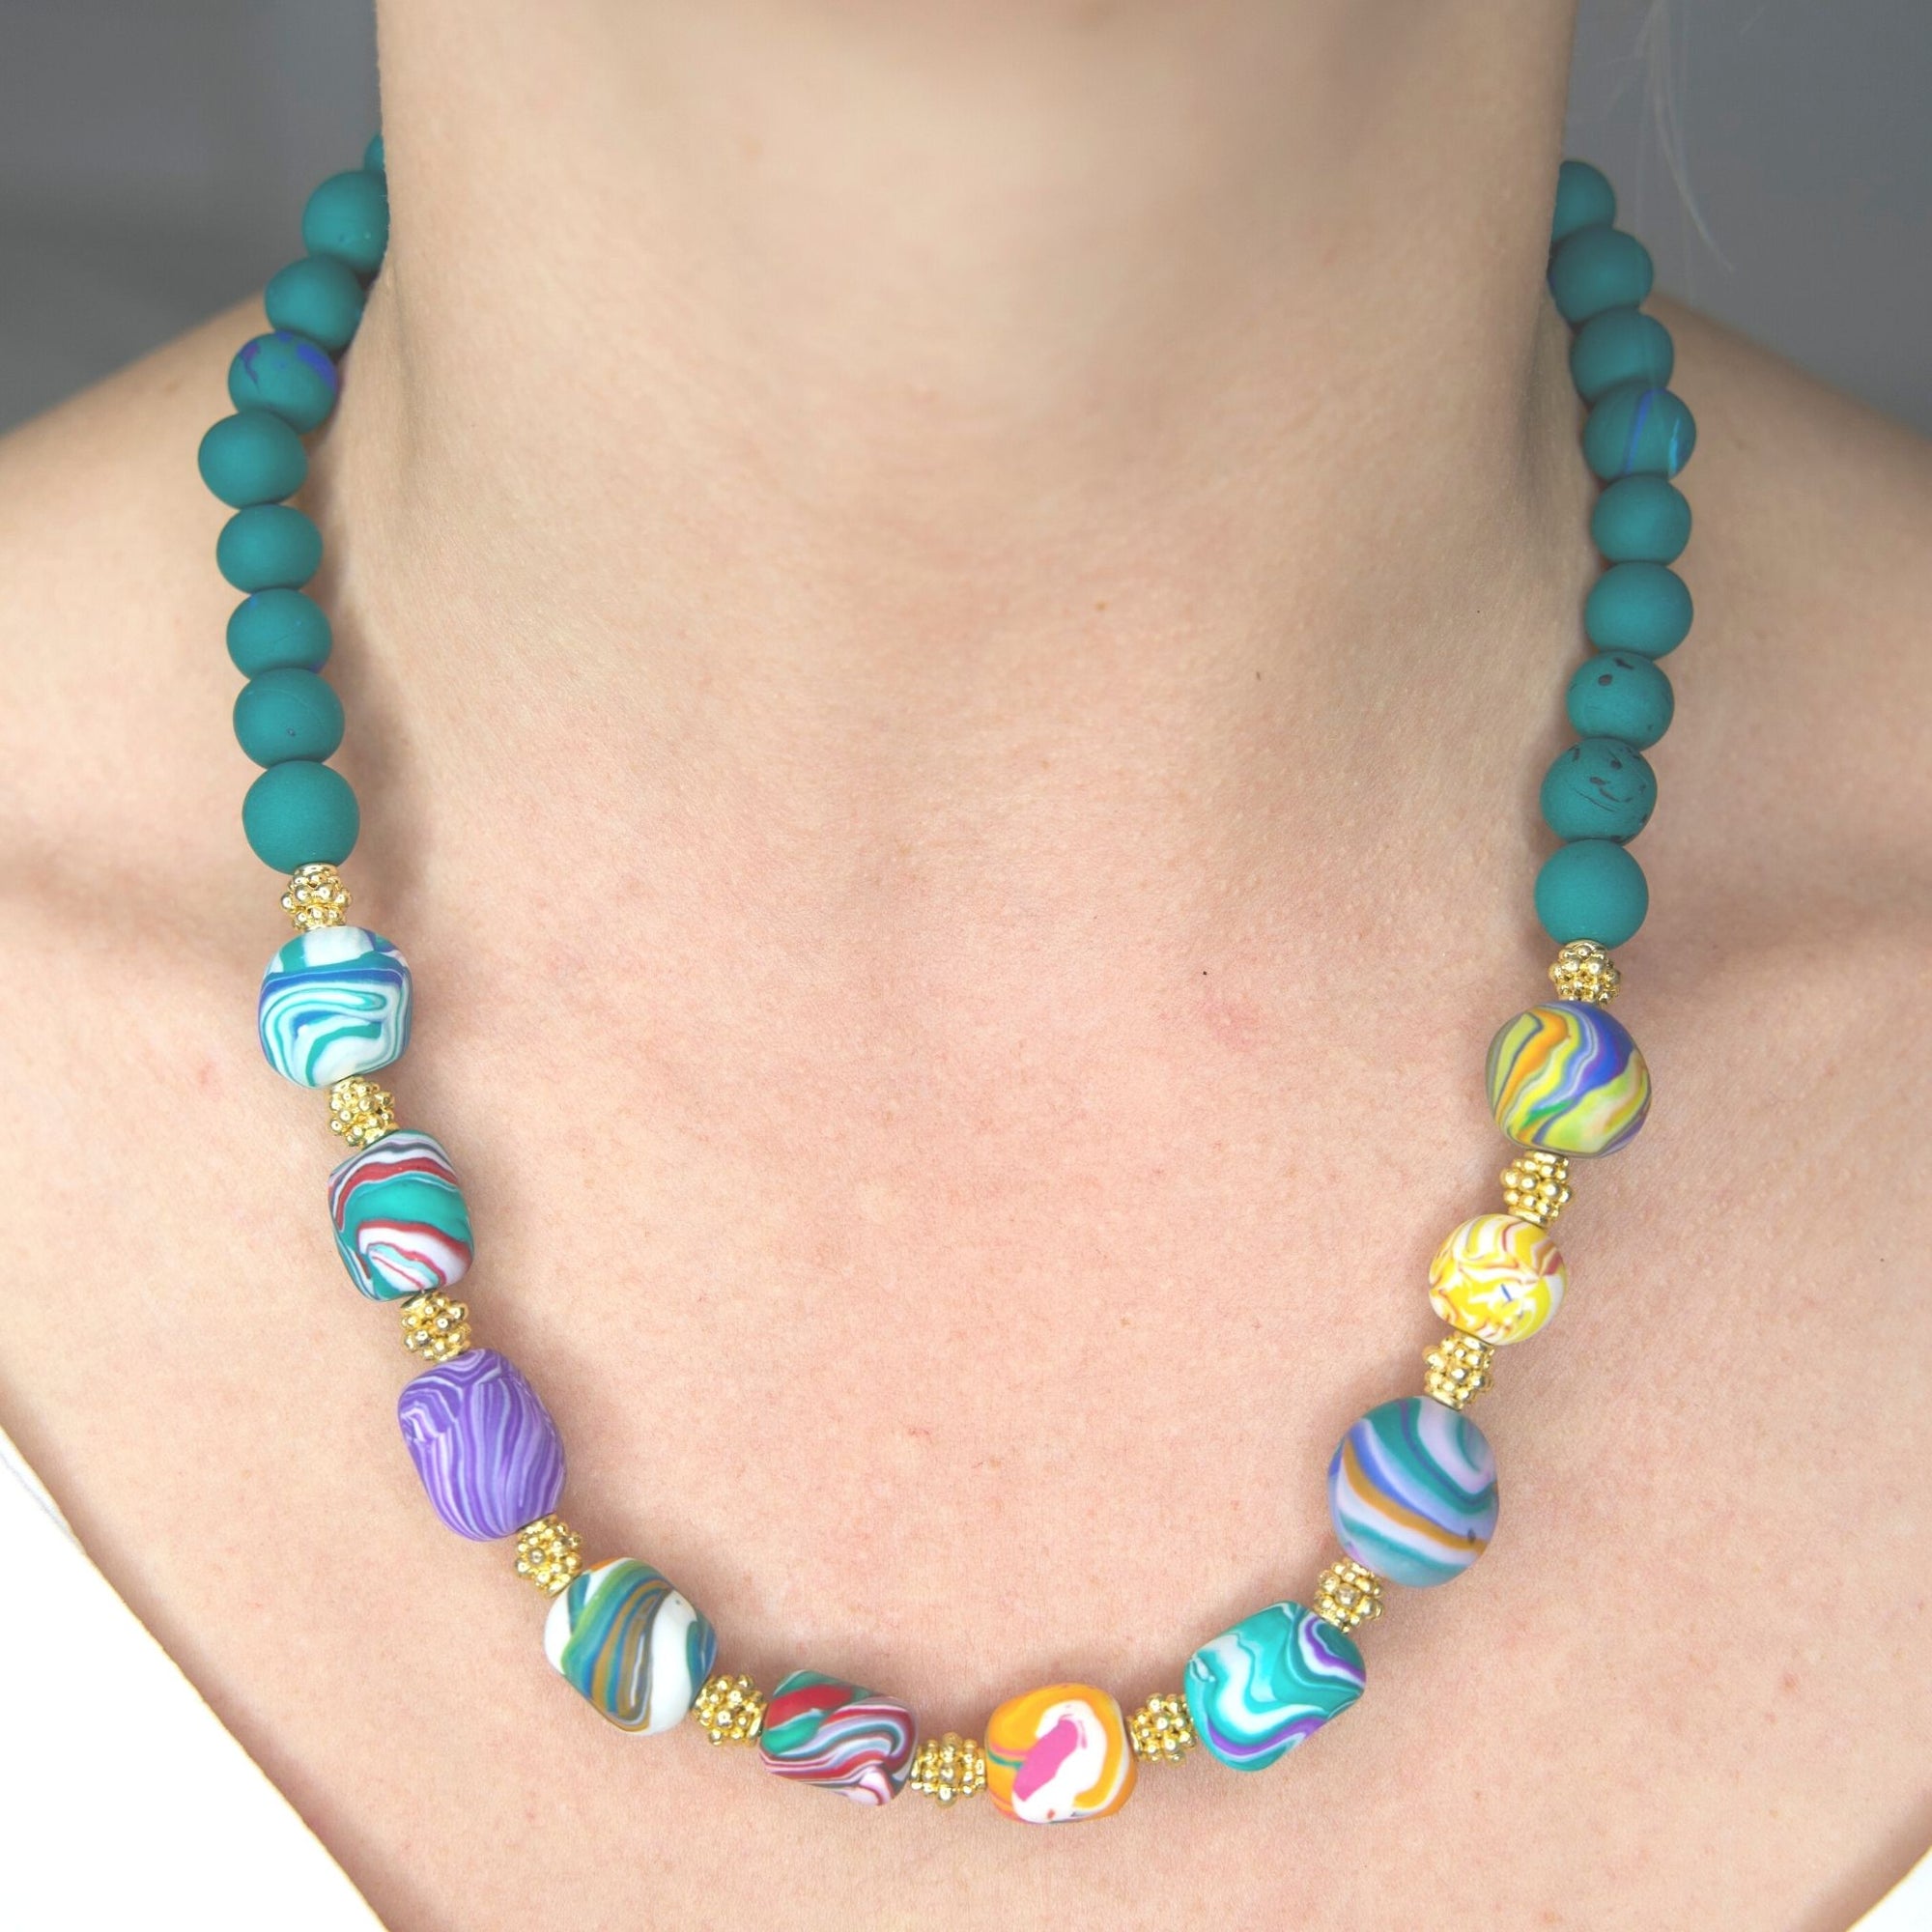 ONE OF A KIND HANDCRAFTED NECKLACE | HANDMADE BEADS EXCLUSIVE TO MARINA-RA DESIGNS GON1001